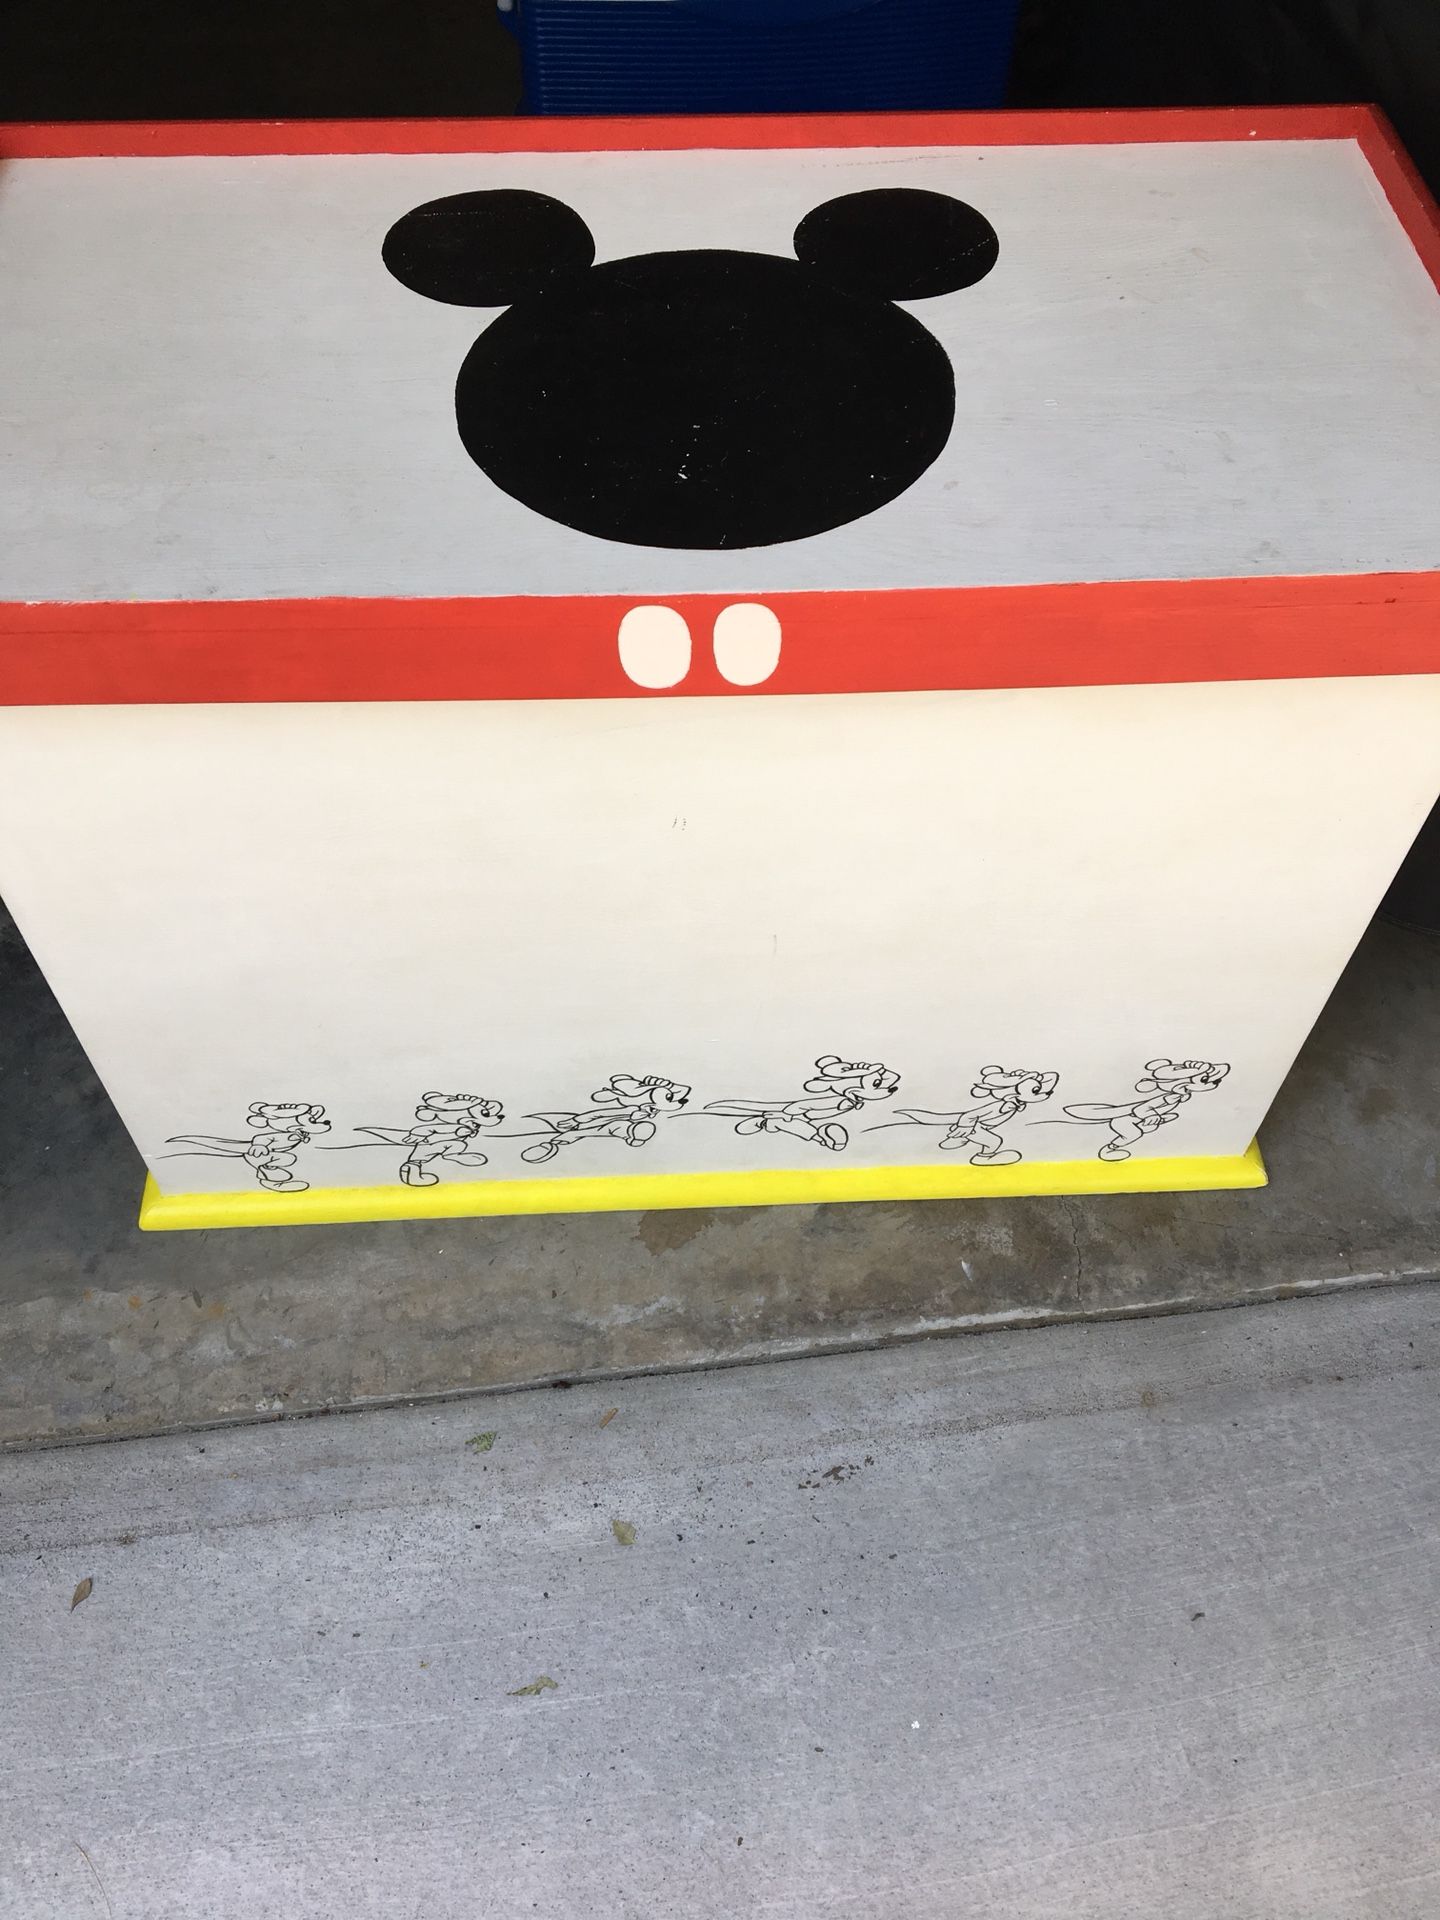 Disney toy chest and posters